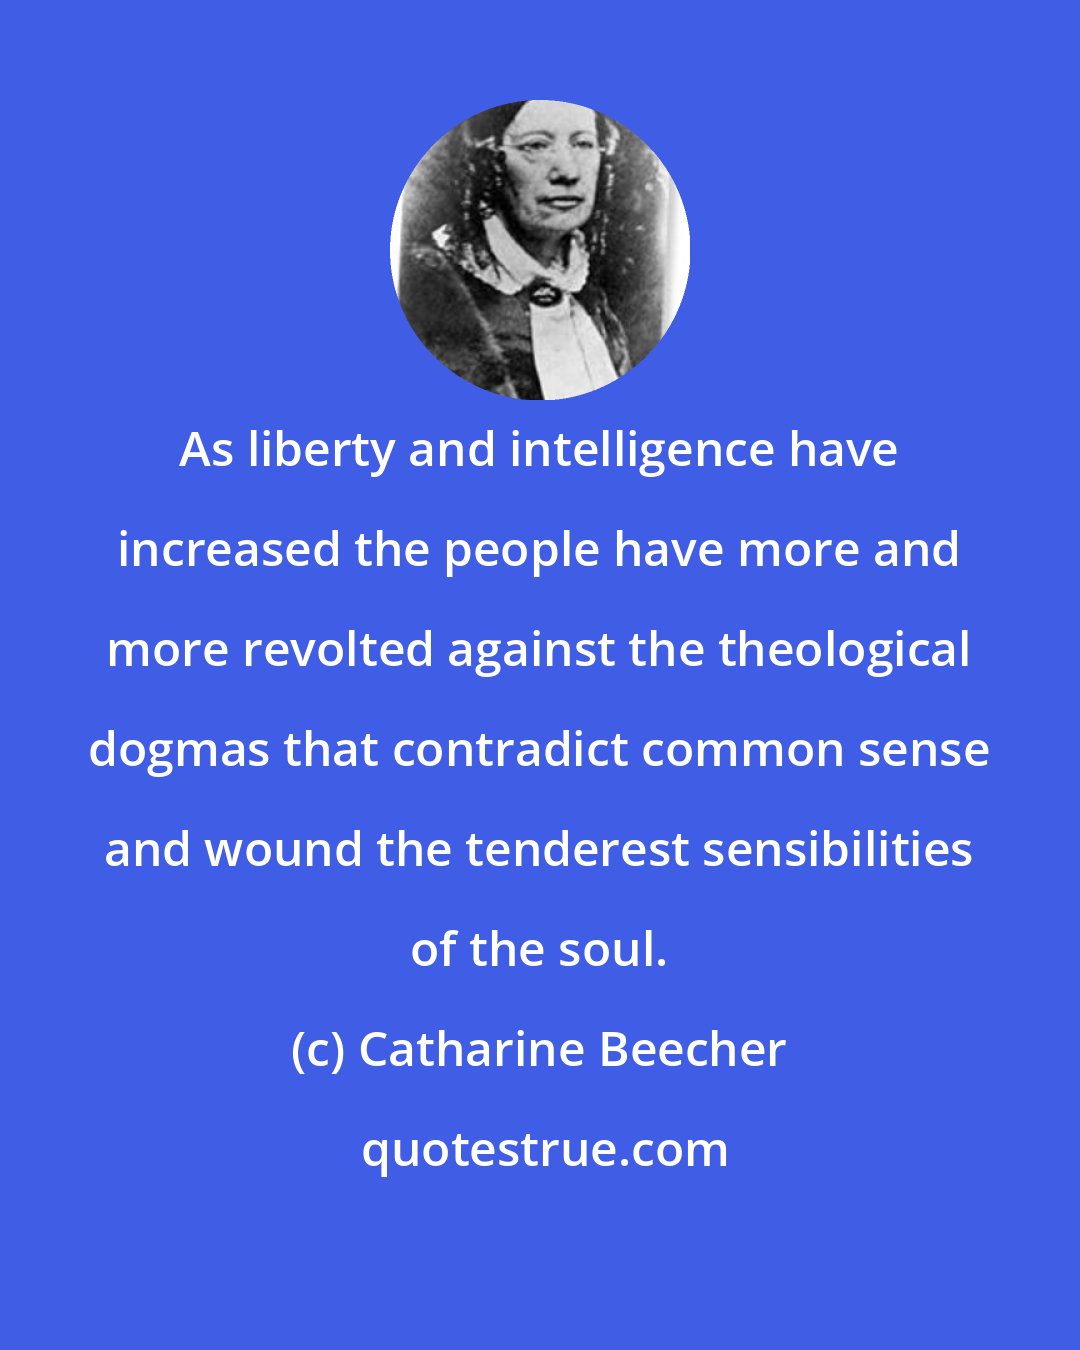 Catharine Beecher: As liberty and intelligence have increased the people have more and more revolted against the theological dogmas that contradict common sense and wound the tenderest sensibilities of the soul.